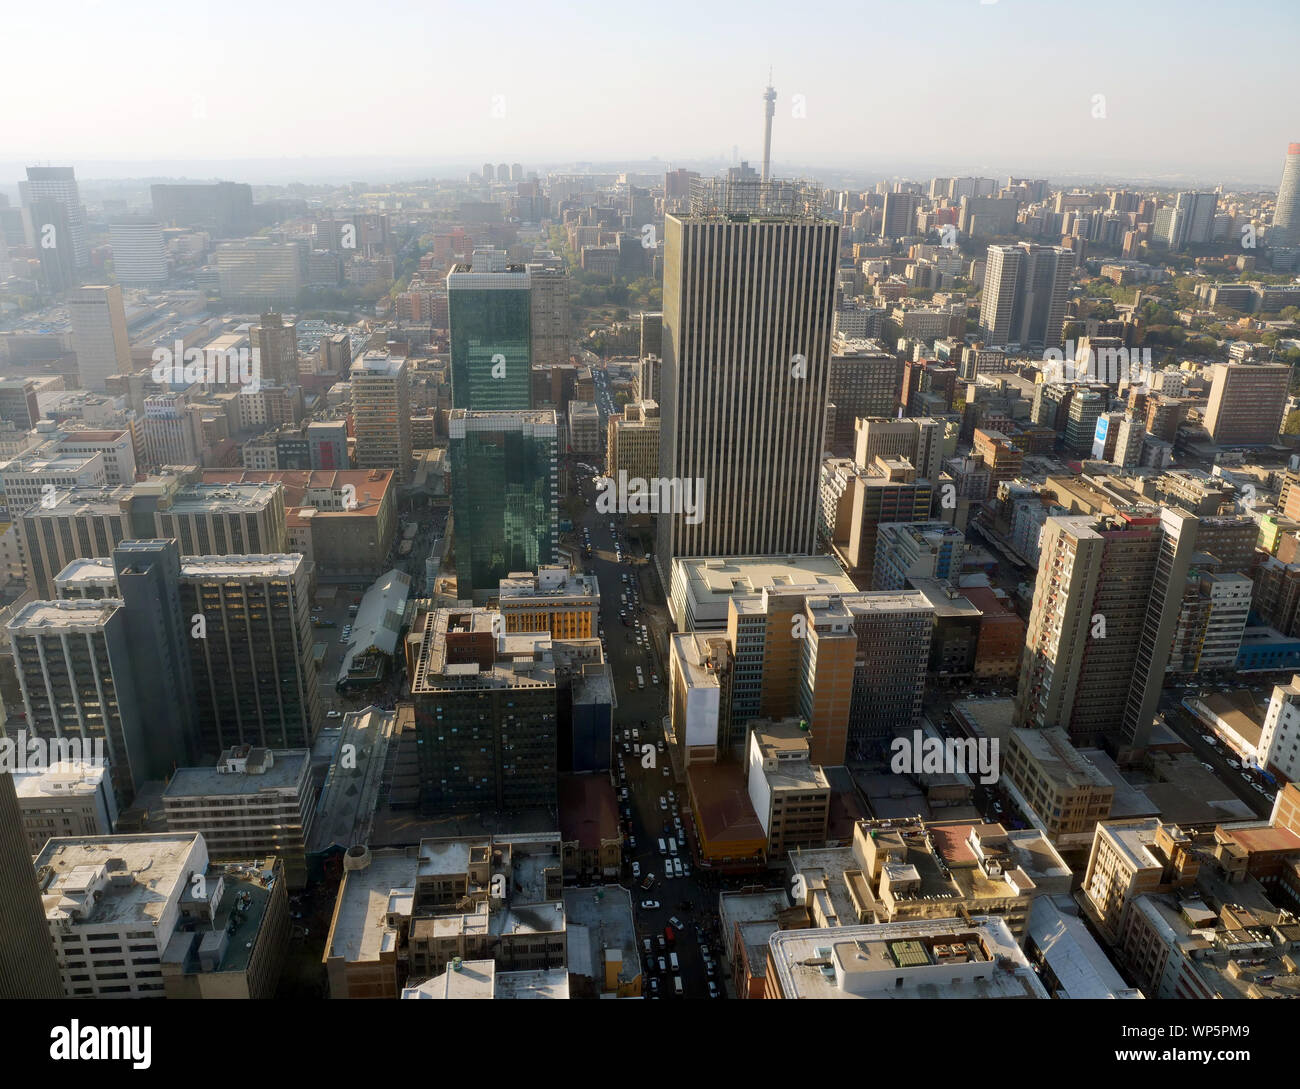 High angle view over Johannesburg city center, South Africa Stock Photo